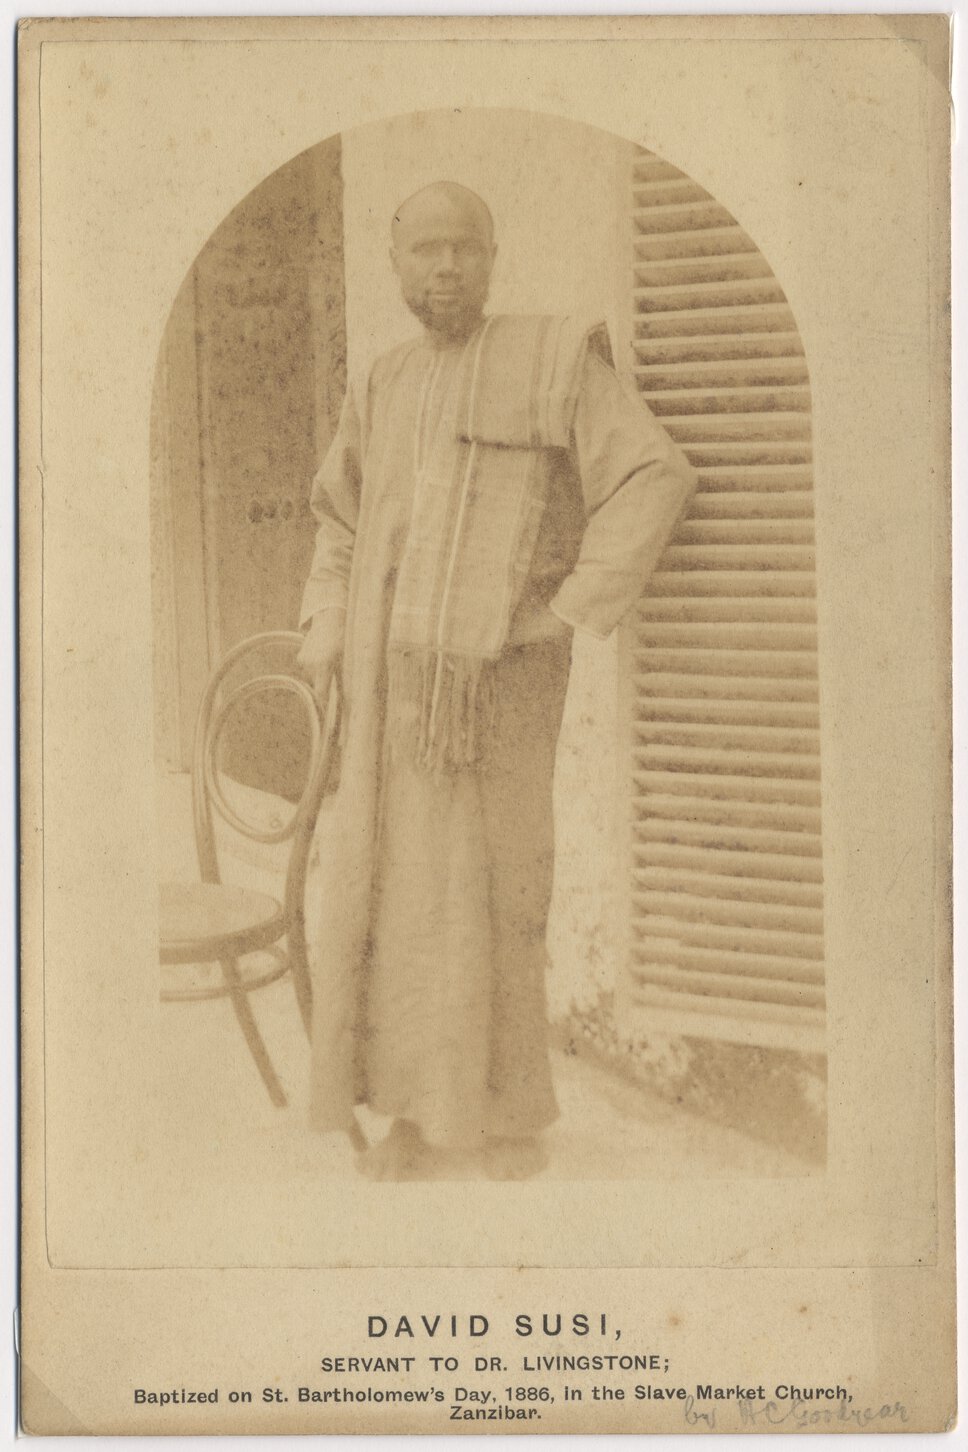 Abdullah Susi in traditional East African clothing, standing with body turned right, facing forward.